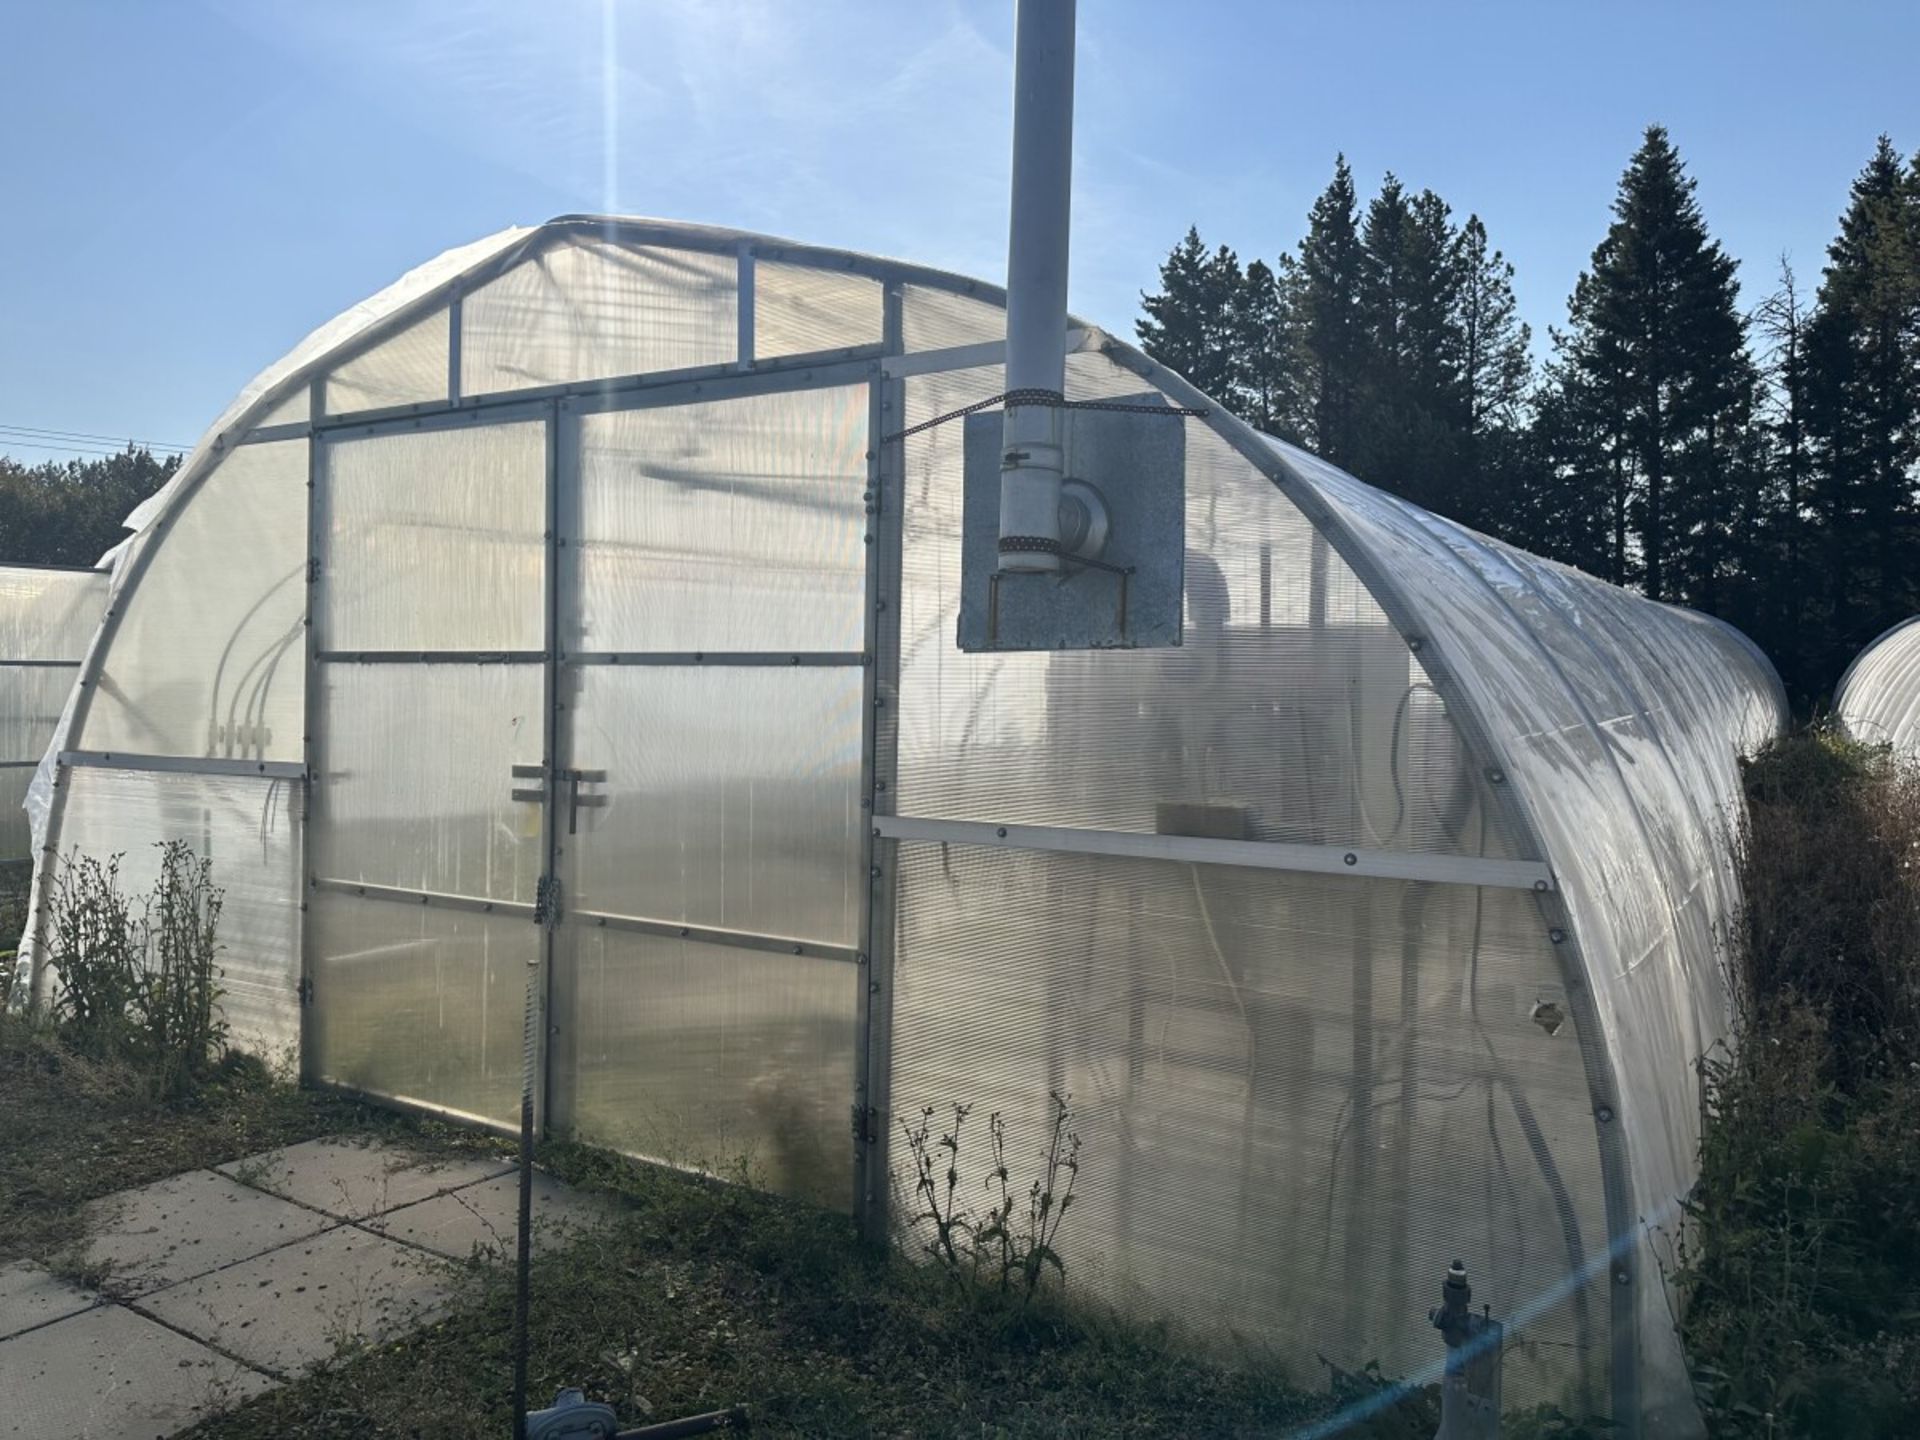 FREESTANDING COLD FRAME GREEN HOUSE W/ NG FURNACE 20FT X 100FT, DRIP IRRIGATION, ETC.